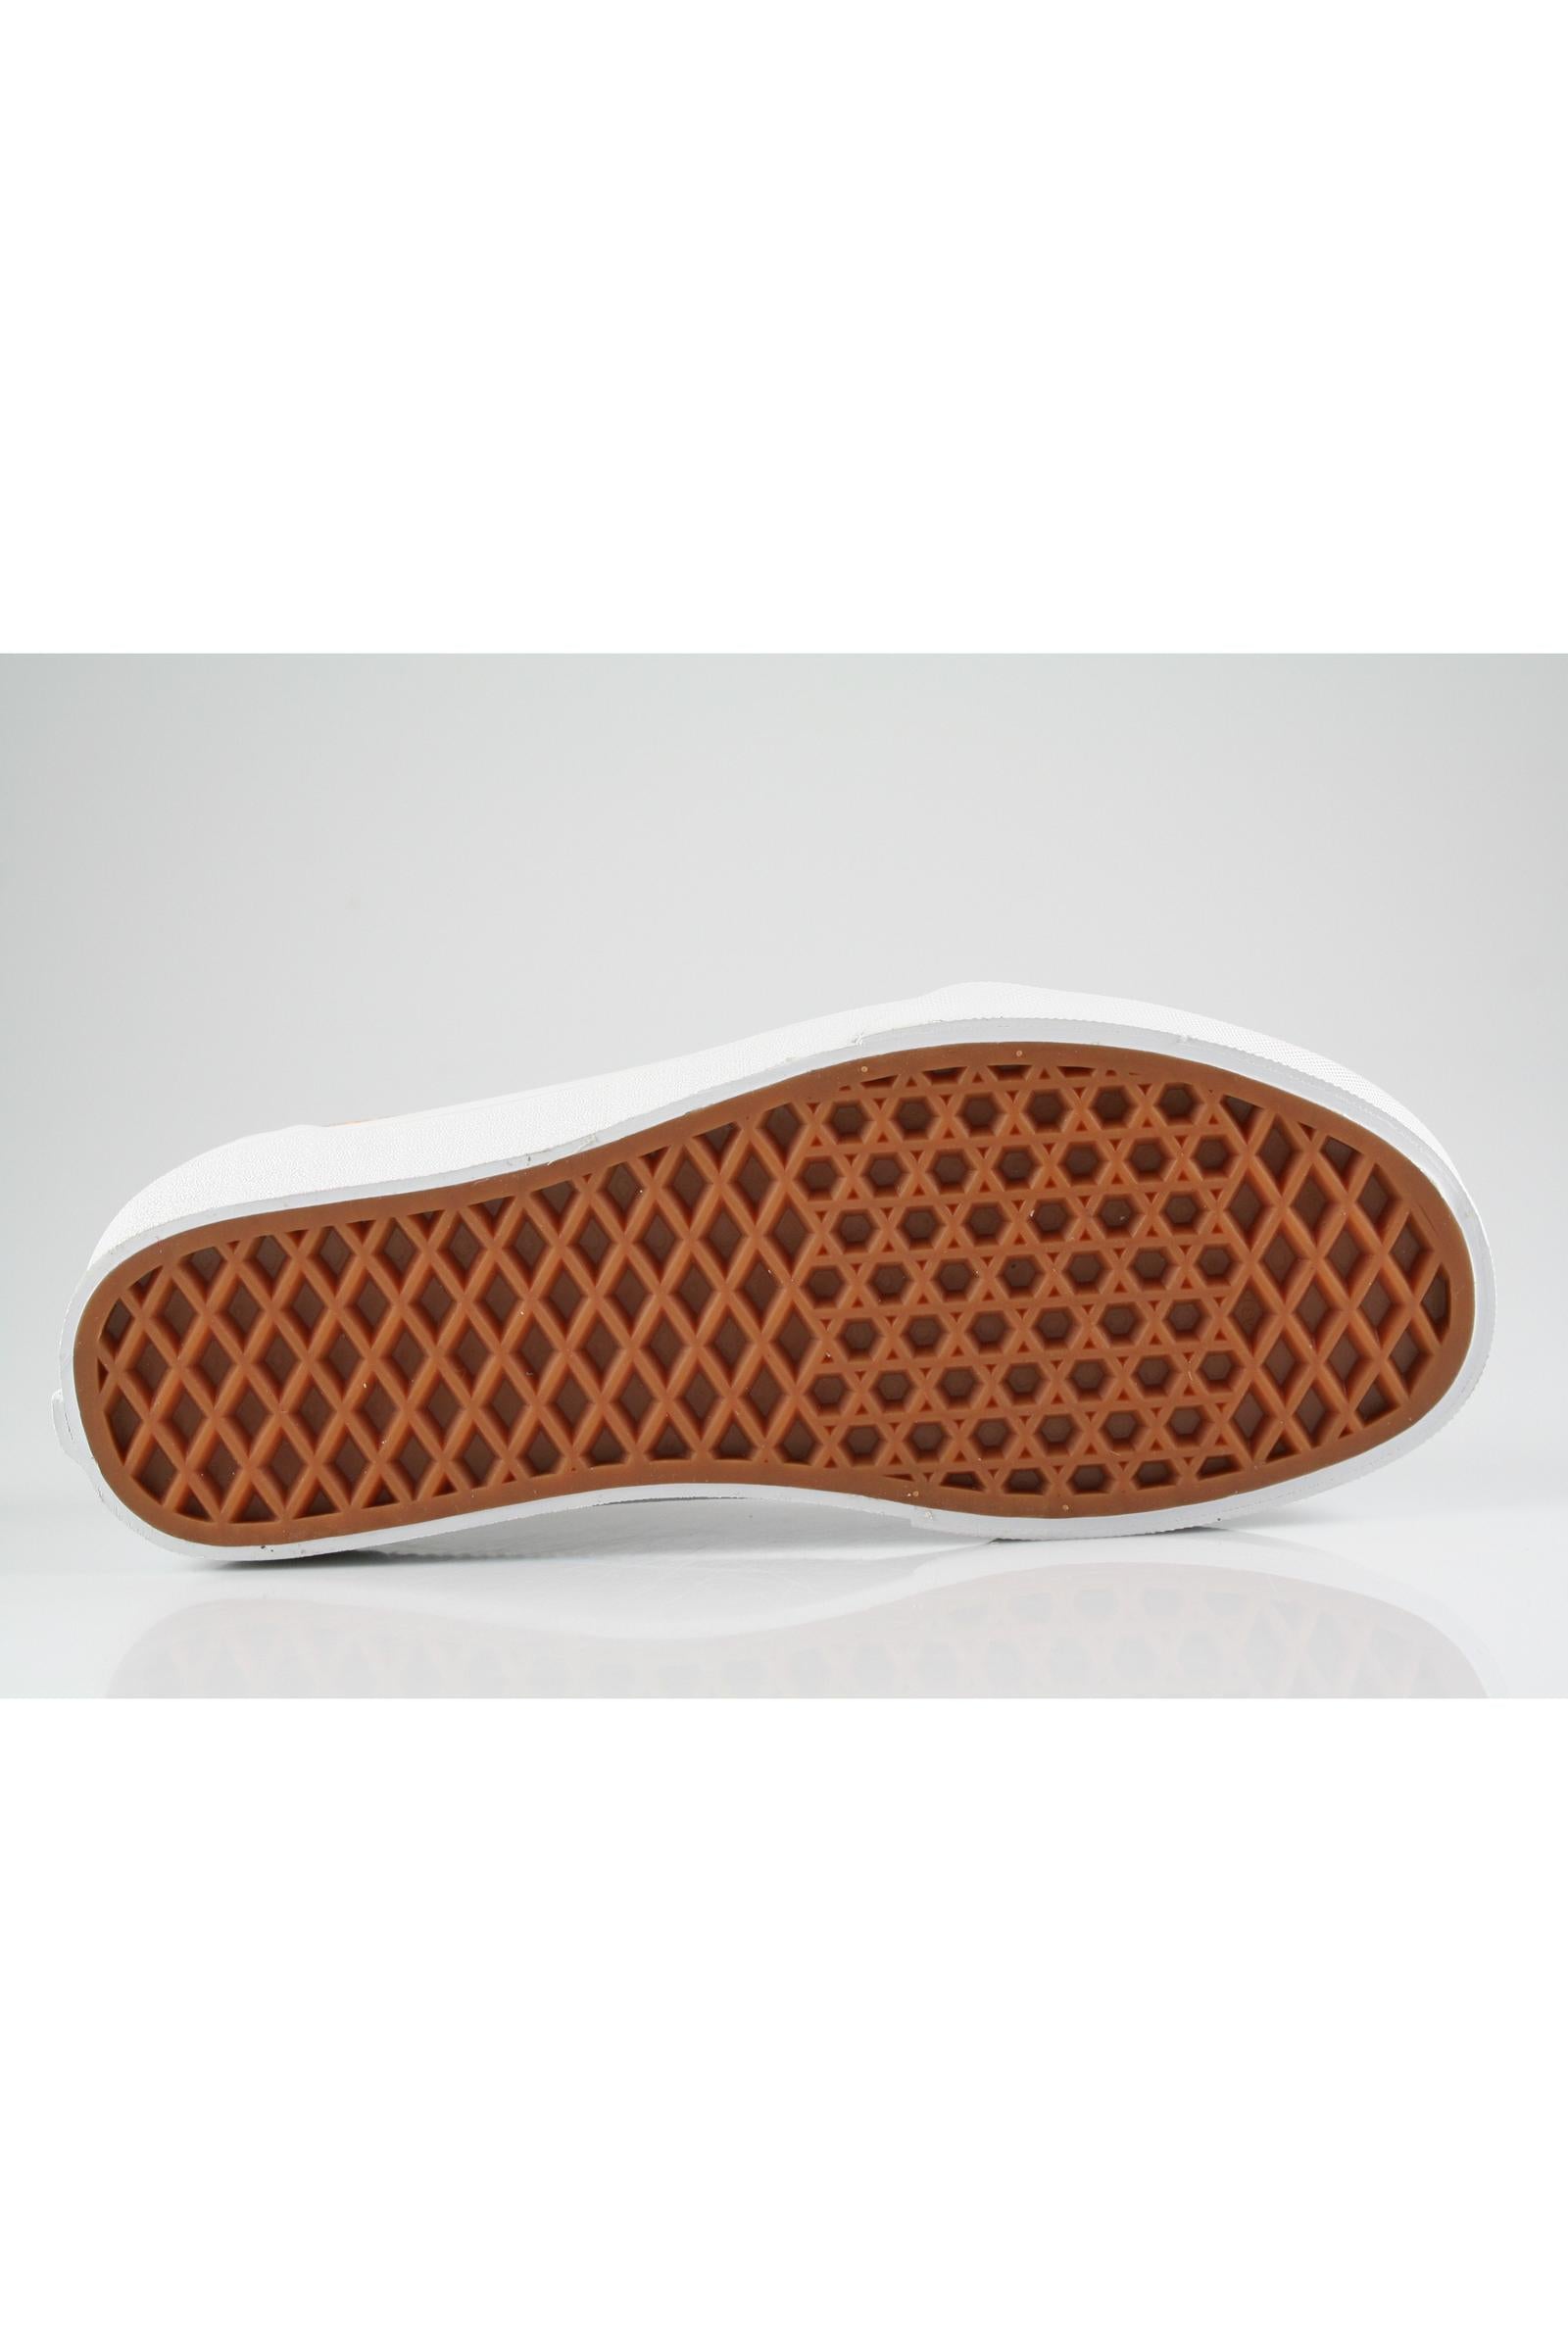 Womens Ward Tumble White/Rose Gold-Sole view